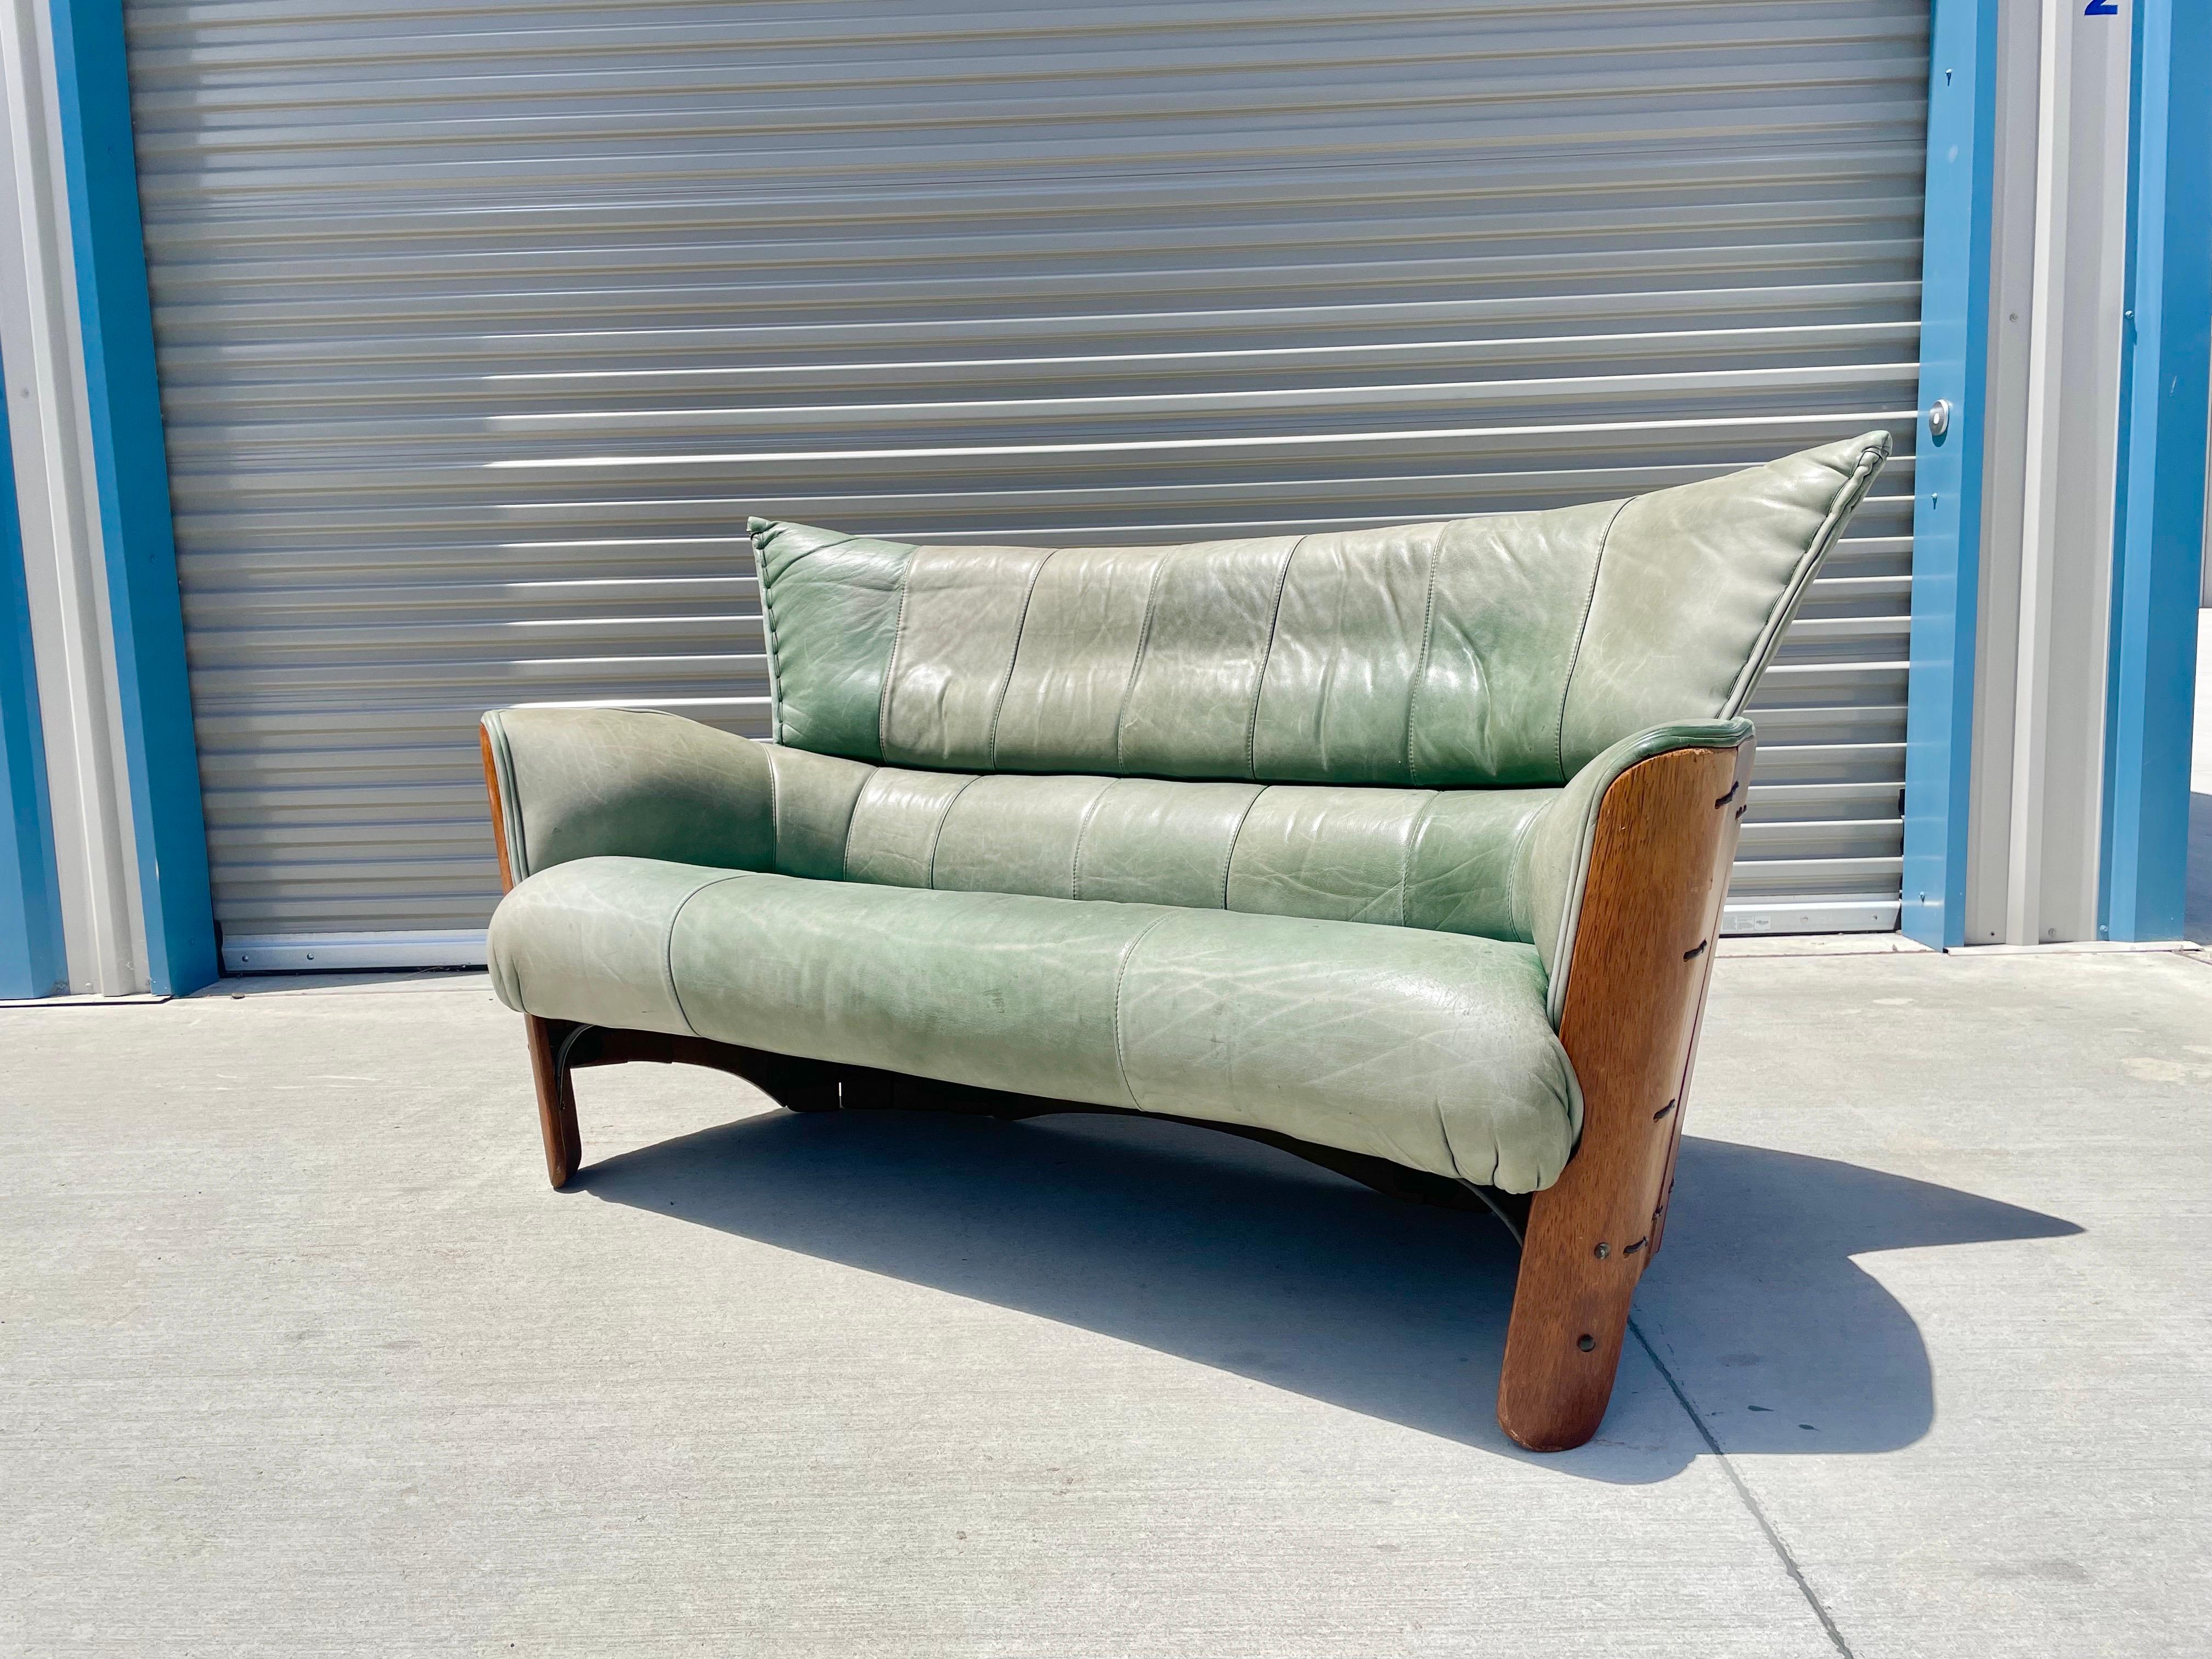 Midcentury palmwood and leather sofa/loveseat design by Pacific Green. This beautiful piece can be used as a sofa or as a loveseat making it pretty unique. It features a wrapped palmwood finish around the sofa with leather binding holding it